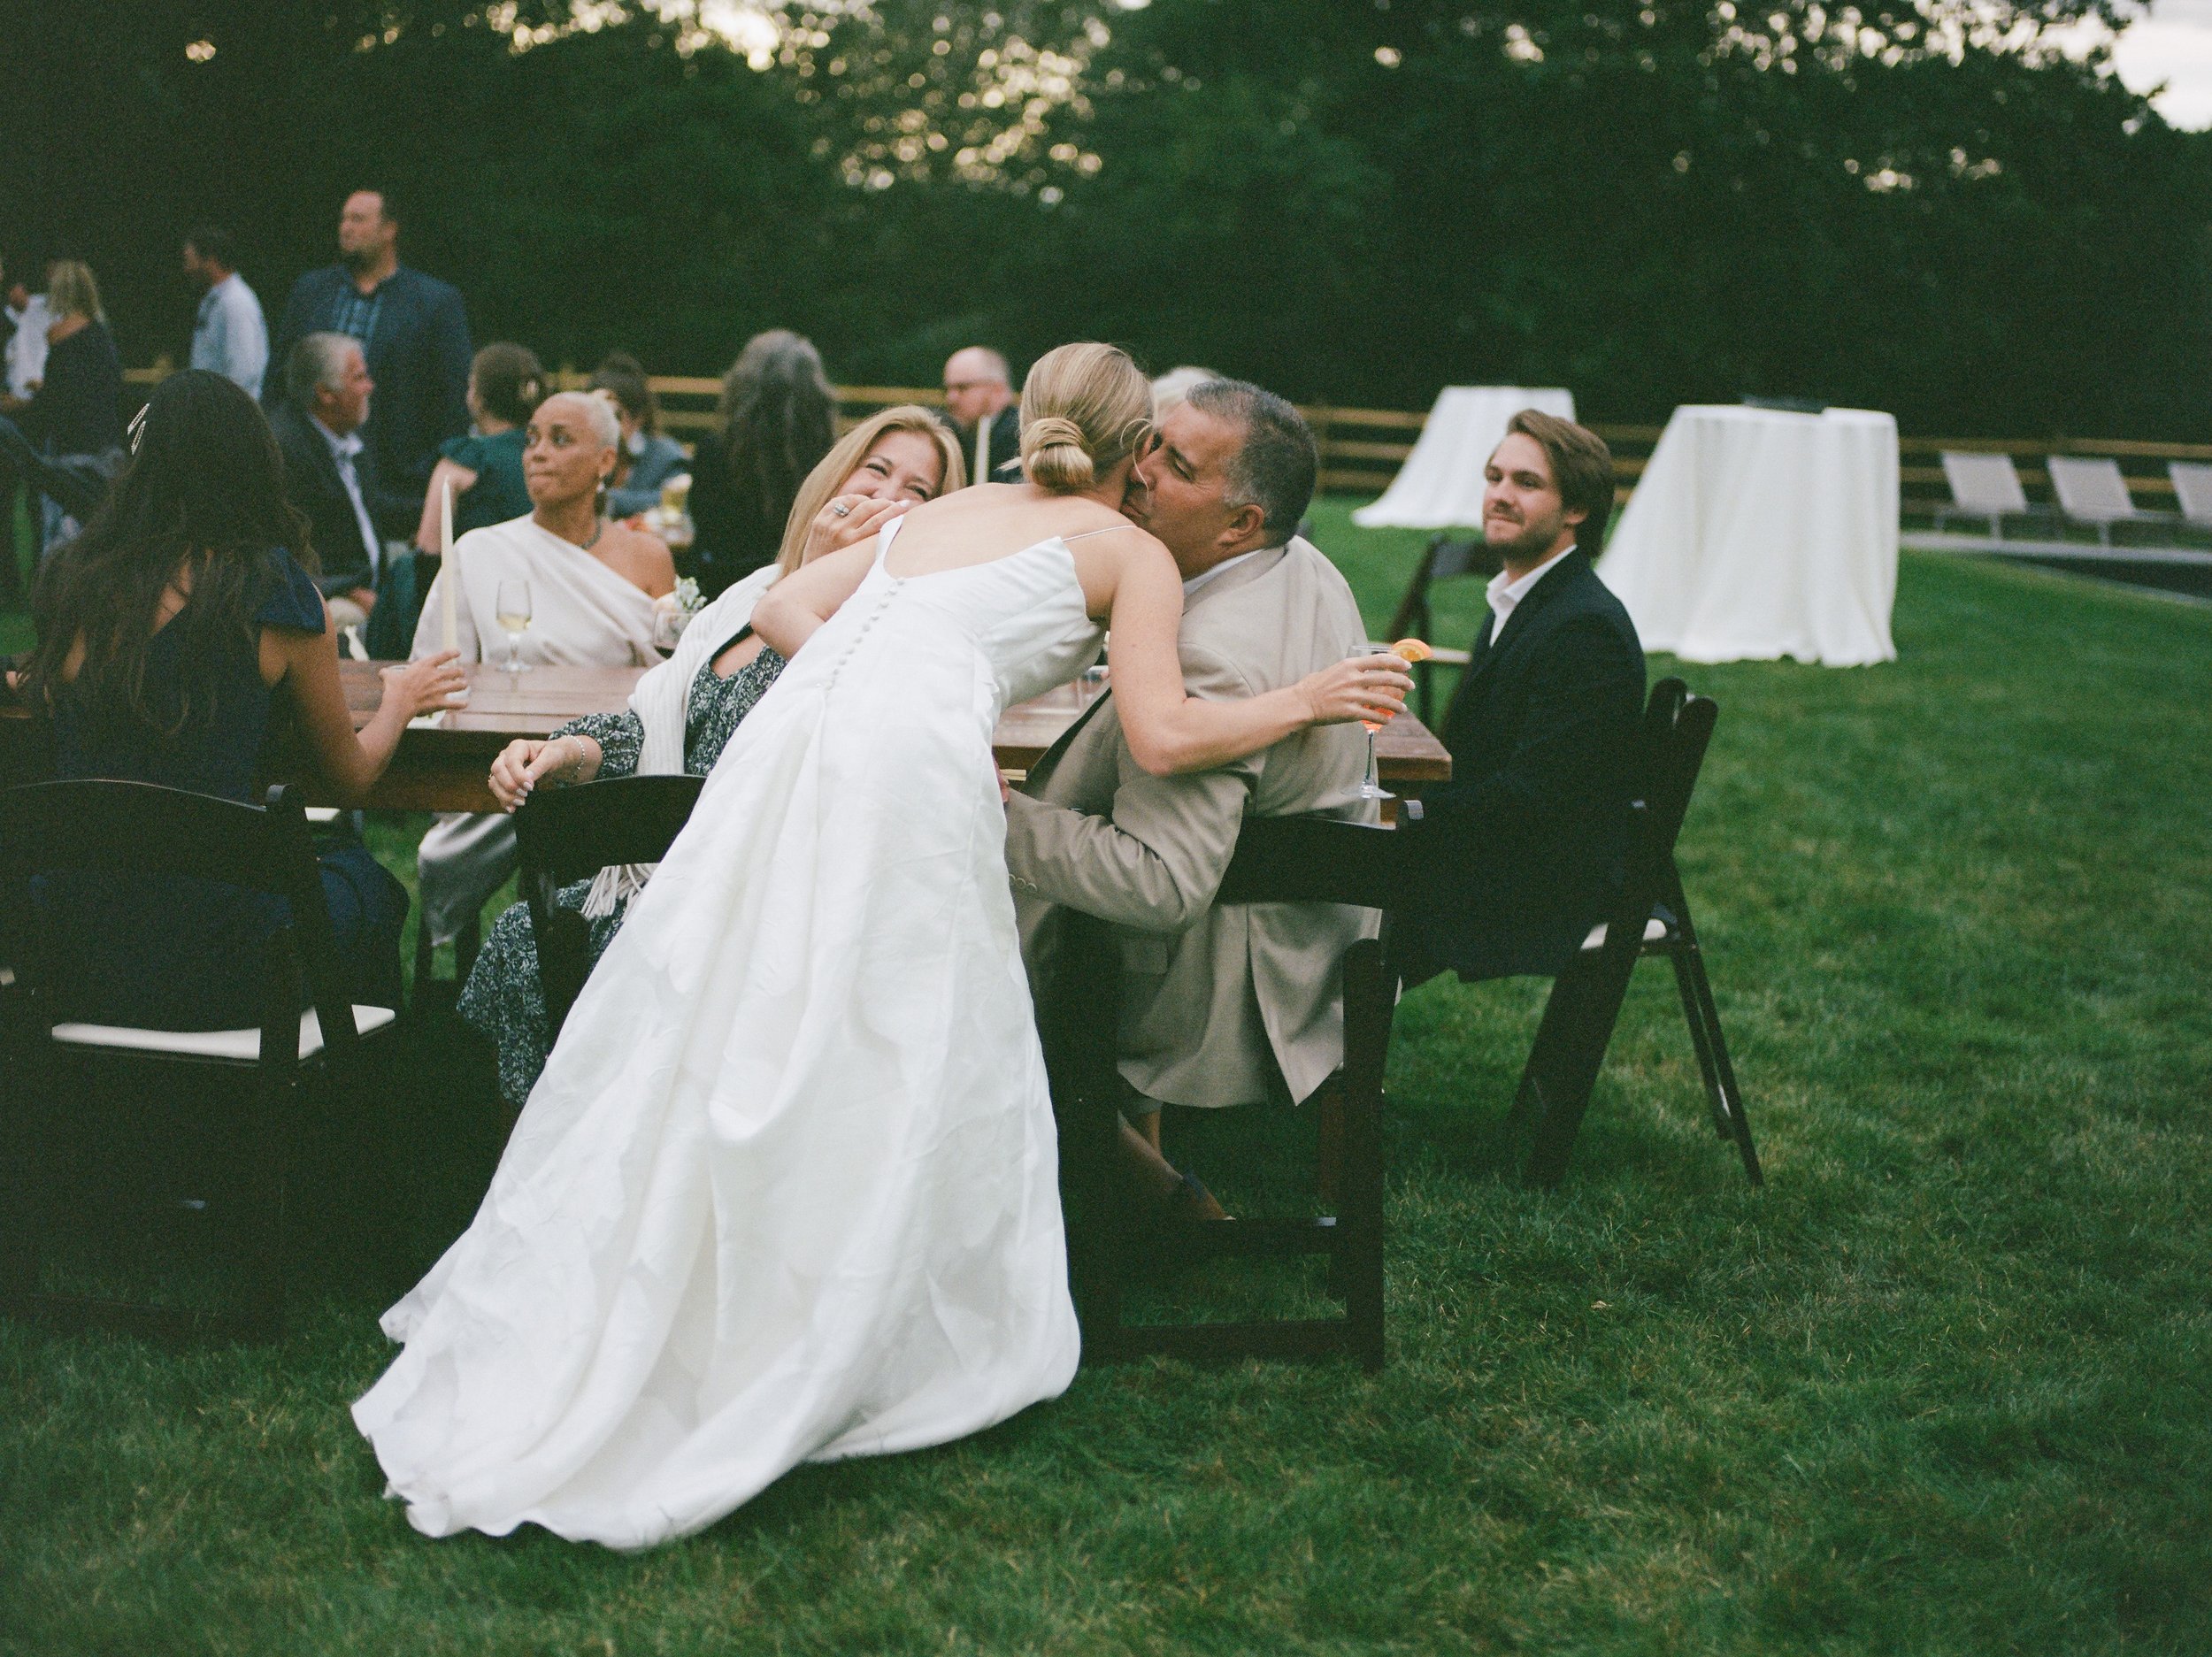 A Classic, Backyard Wedding on Martha's Vineyard Private Estate with Vintage Bronco | 35mm and Medium Format Film Wedding Photography